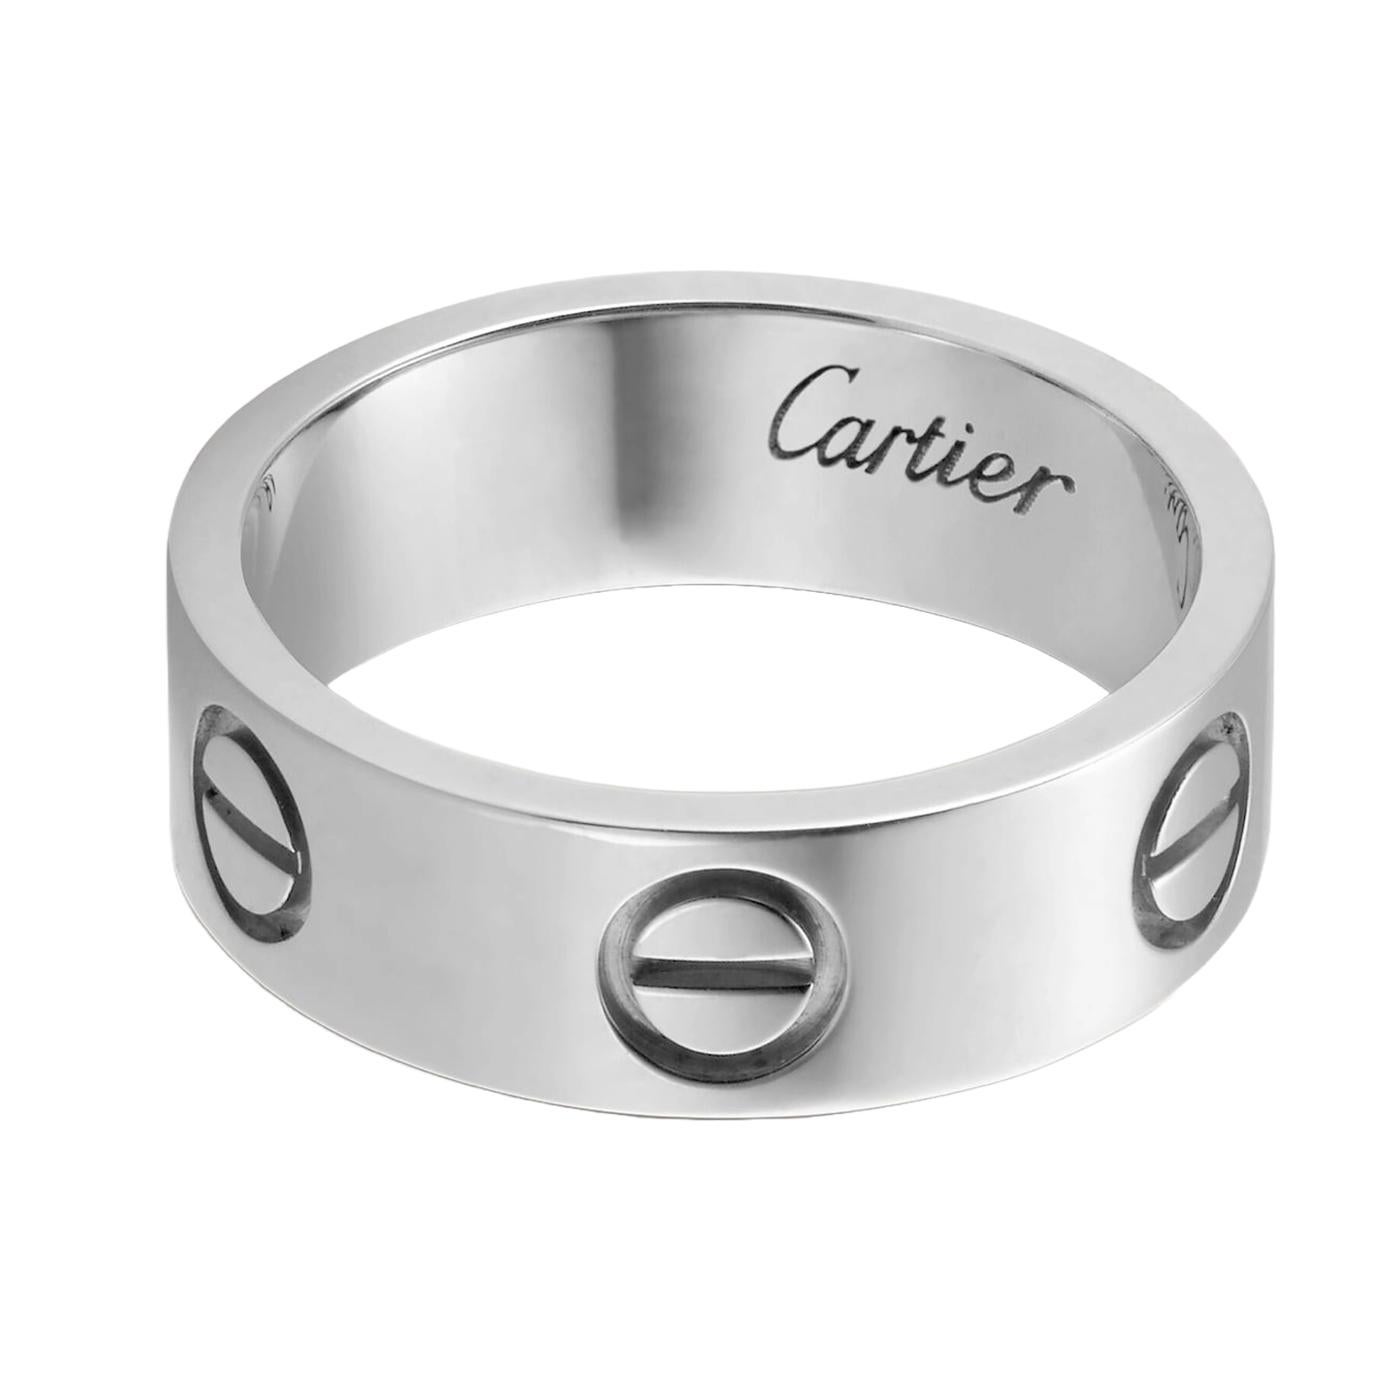 LOVE Ring, White Gold (750/1000). Width: 5.5 mm (for size 63).

Details:
Brand: Cartier
Style: Love Ring
Material: White Gold
Cartier Size: 63
Theme: Romantic, Love
Scope of Delivery: Box and Papers
Condition: New
Purchased: 2023

Occasion: